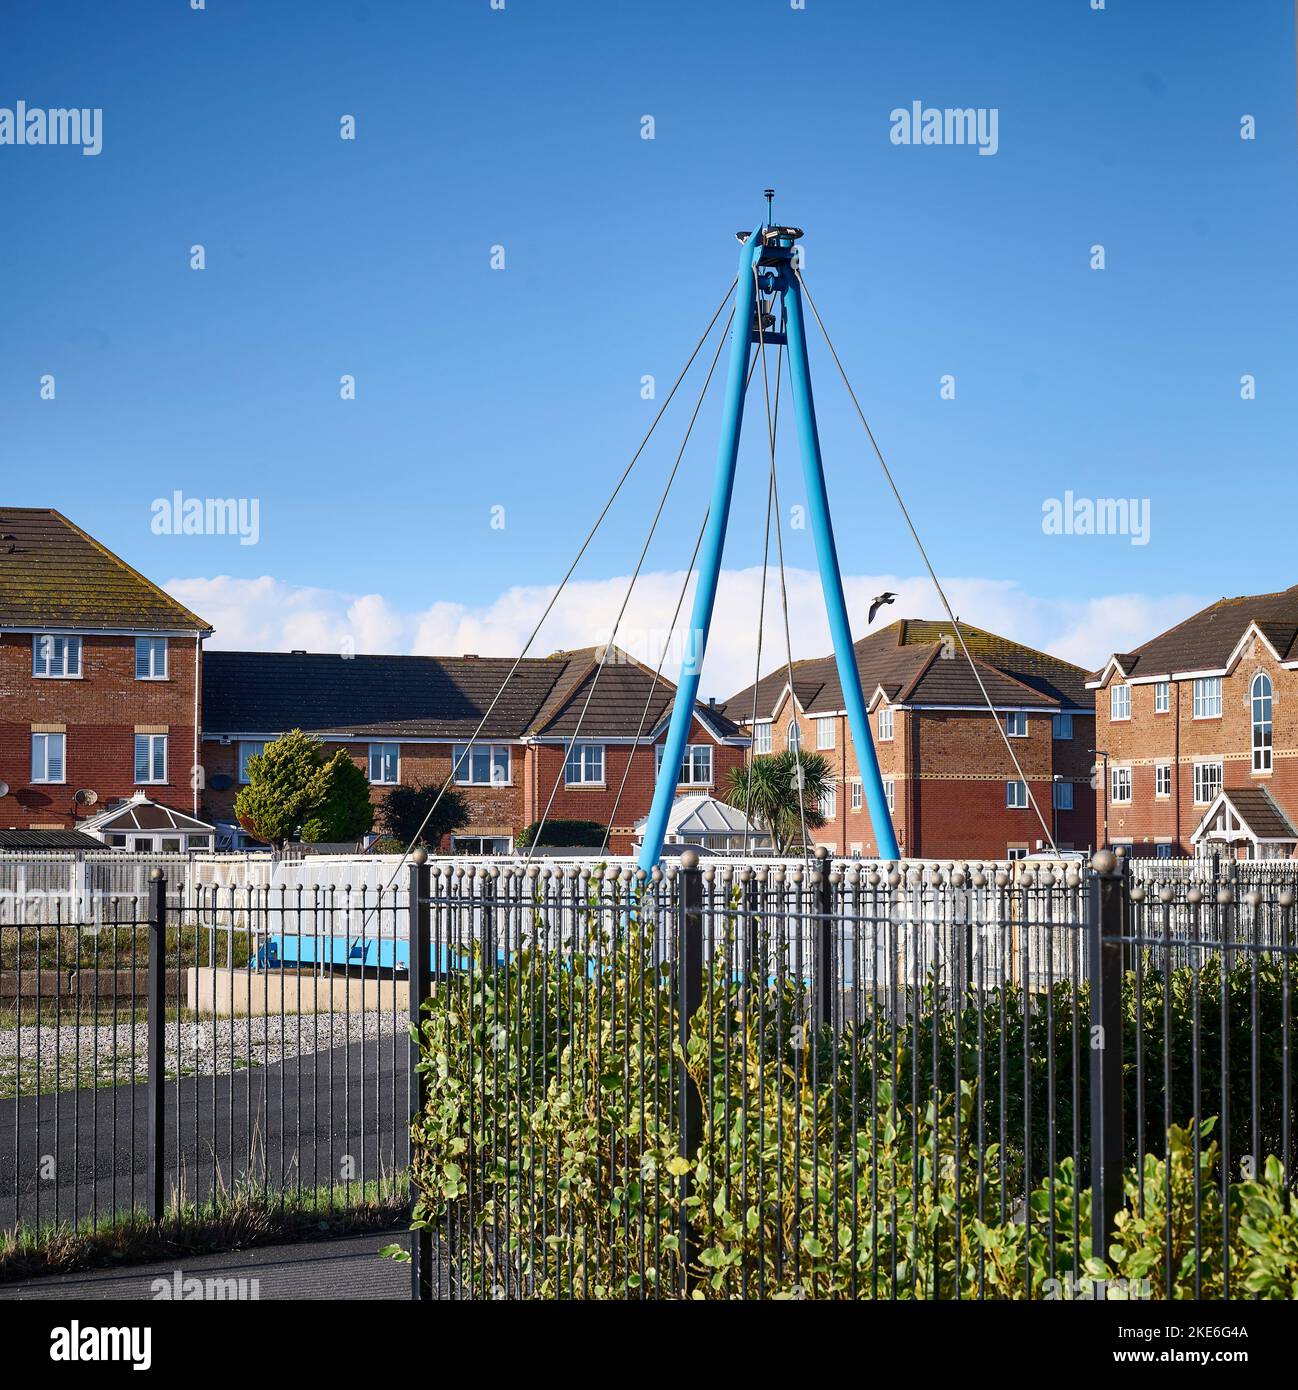 Fleetwood marina swing bridge in the middle of a modern housing estate Stock Photo